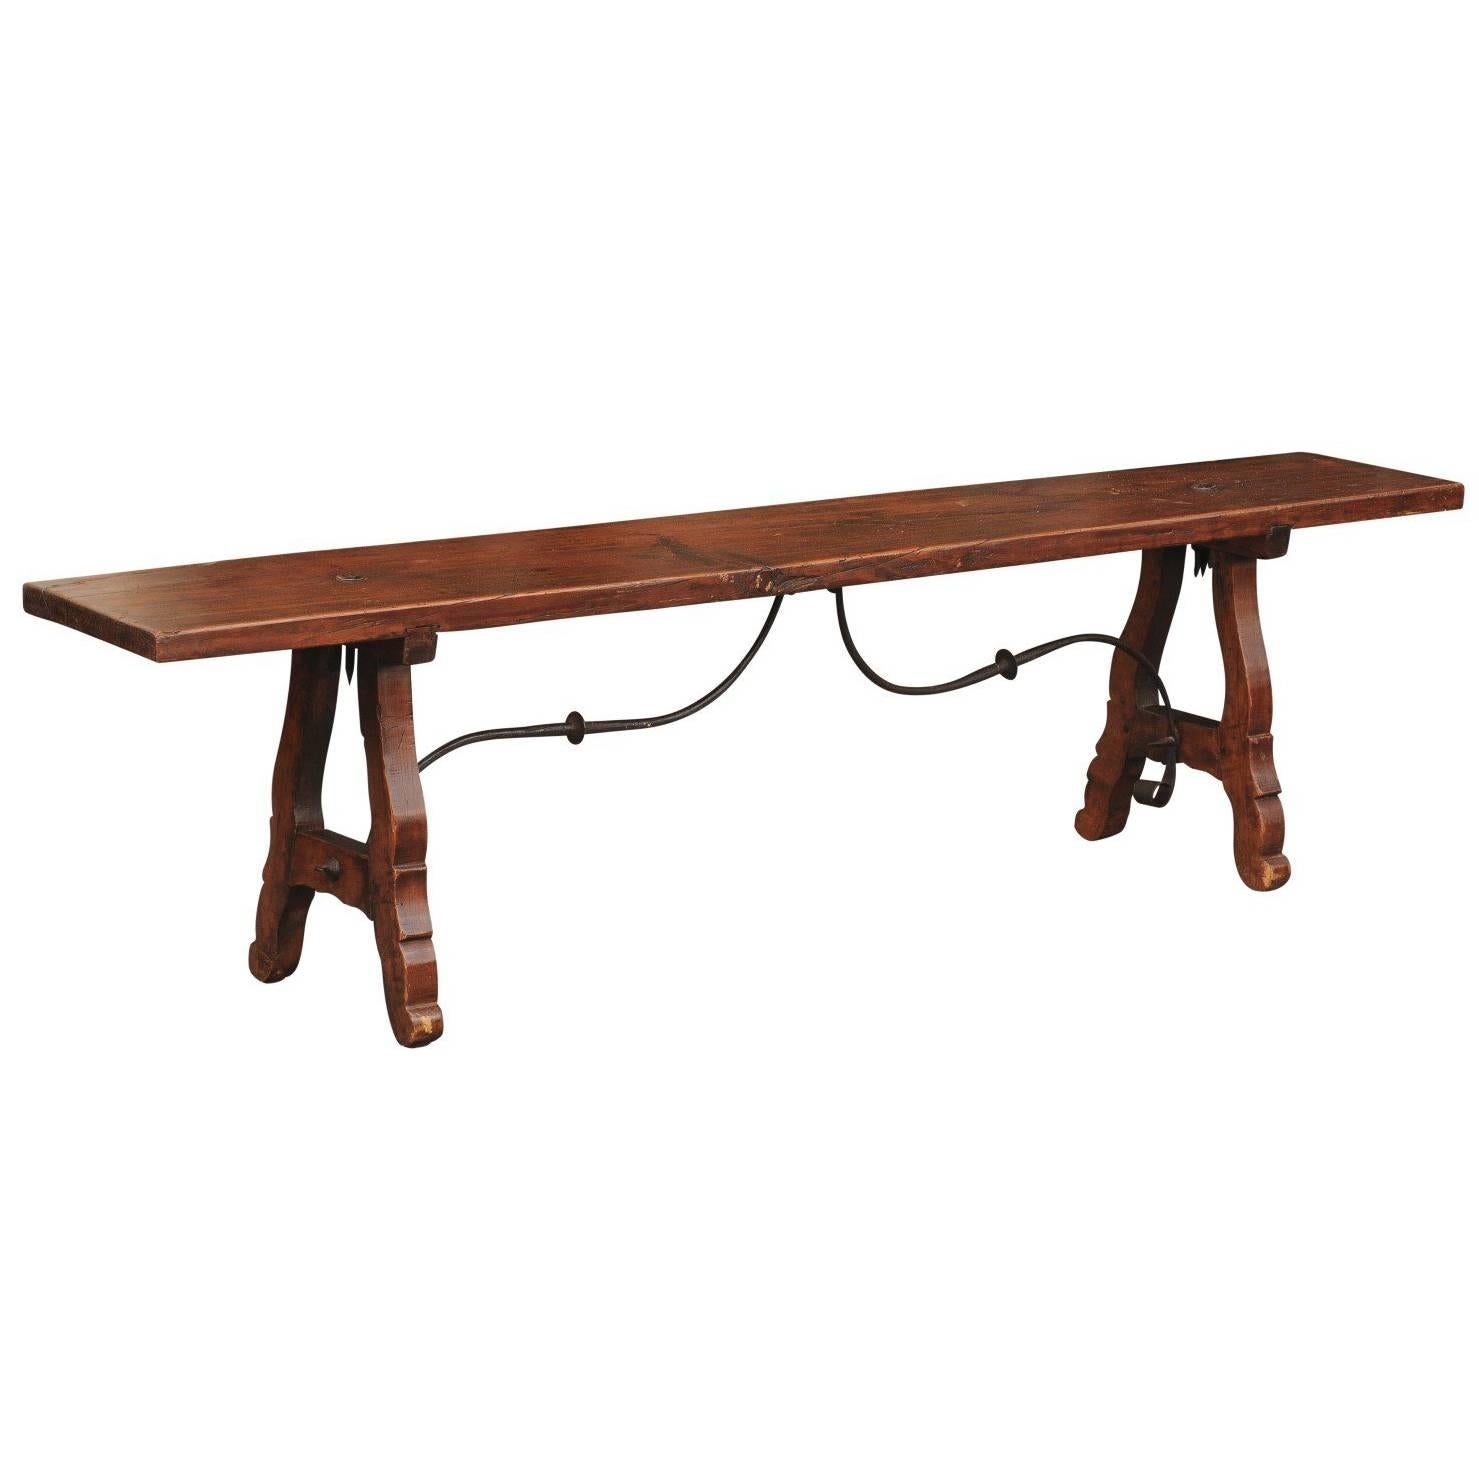 Spanish Late 19th Century Long Wooden Bench with Iron Stretcher